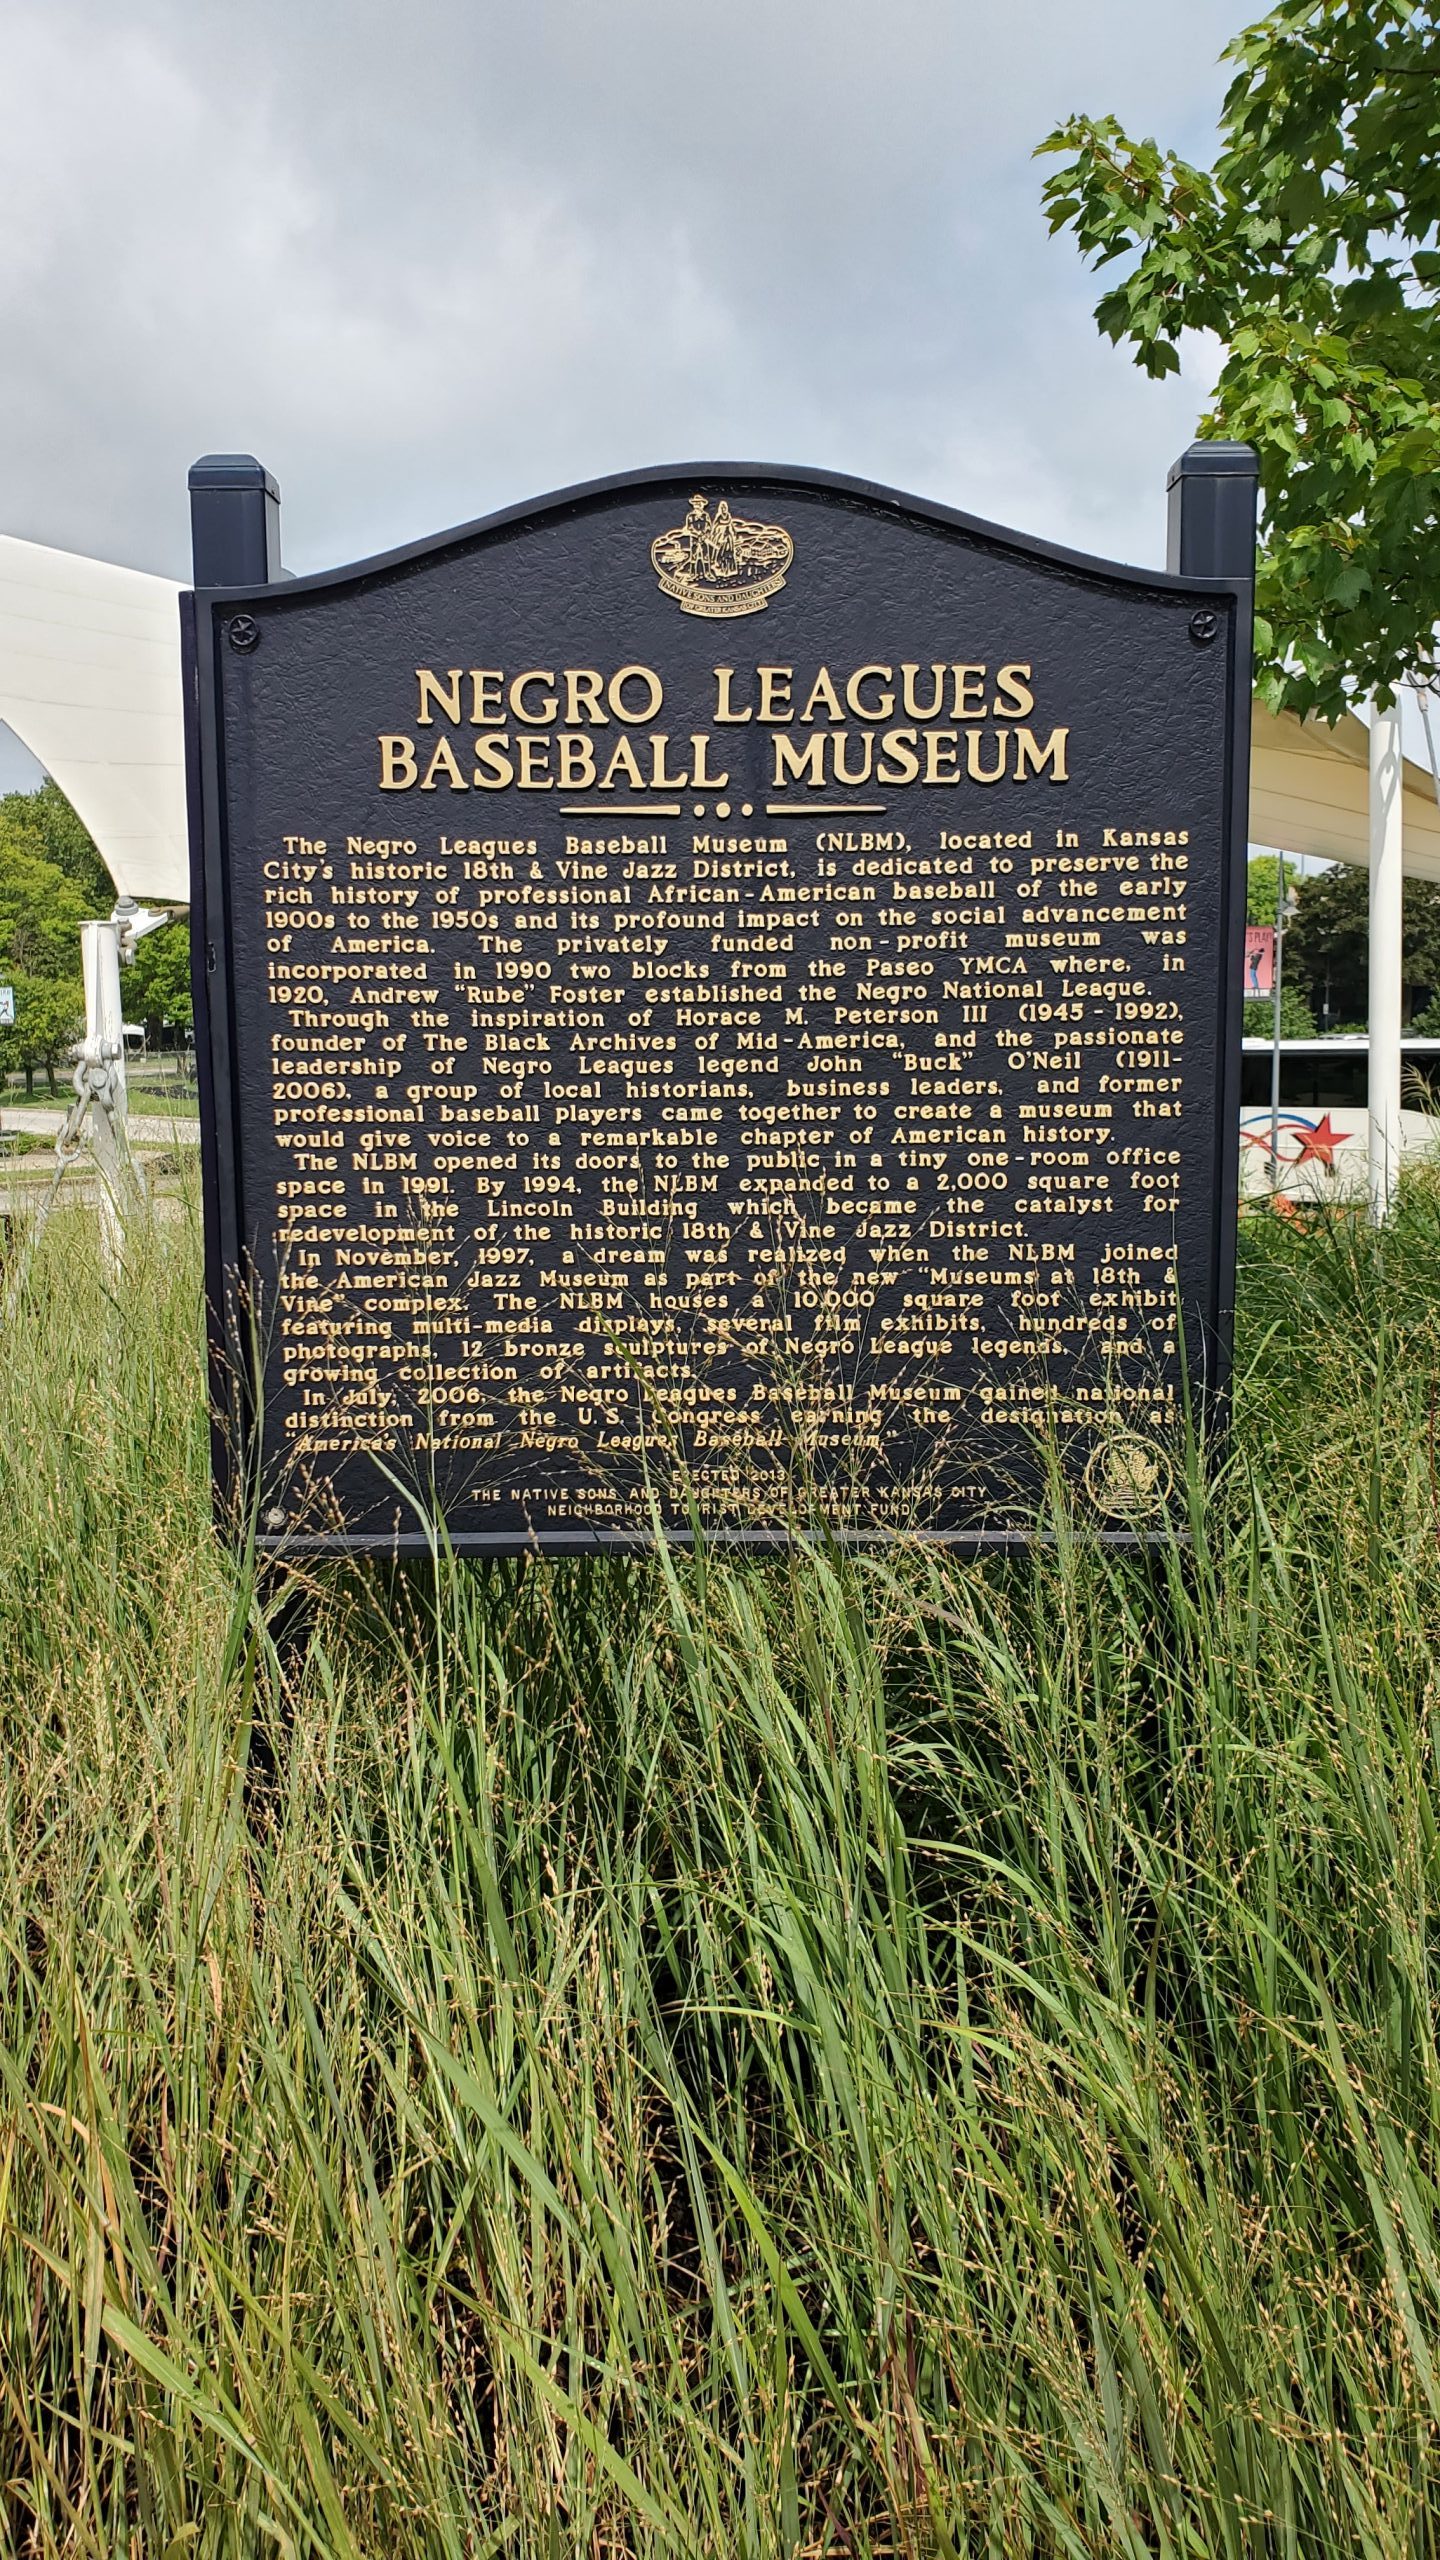 Picture of the sign indicating the historic significance of the Negro Leagues Baseball Museum in Kansas City, Missouri